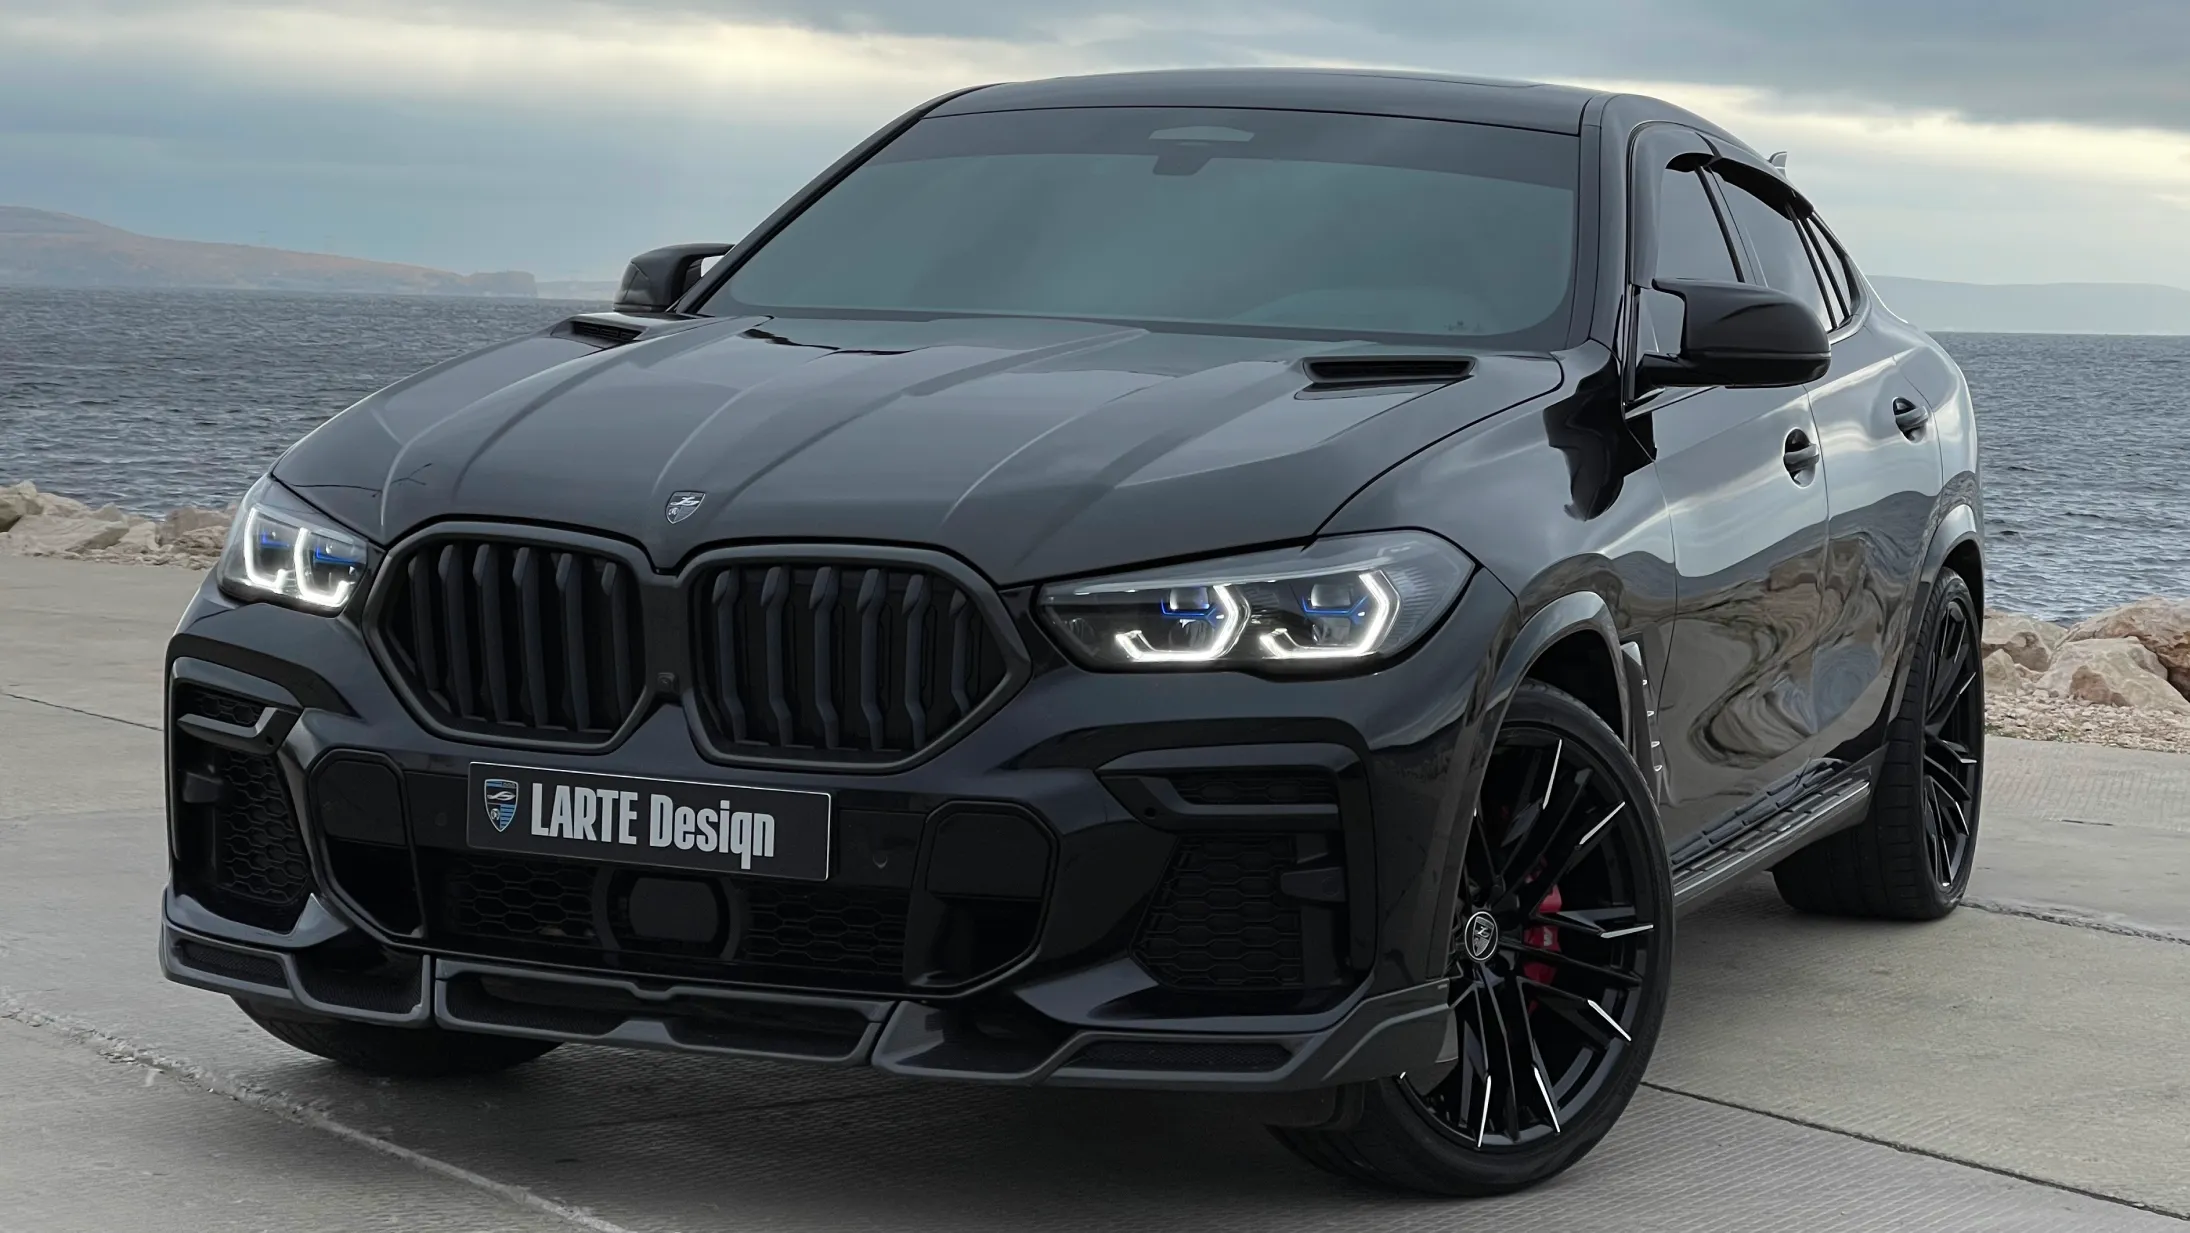 Front angle view on a BMW X6 with a body kit giving the car a custom appearance